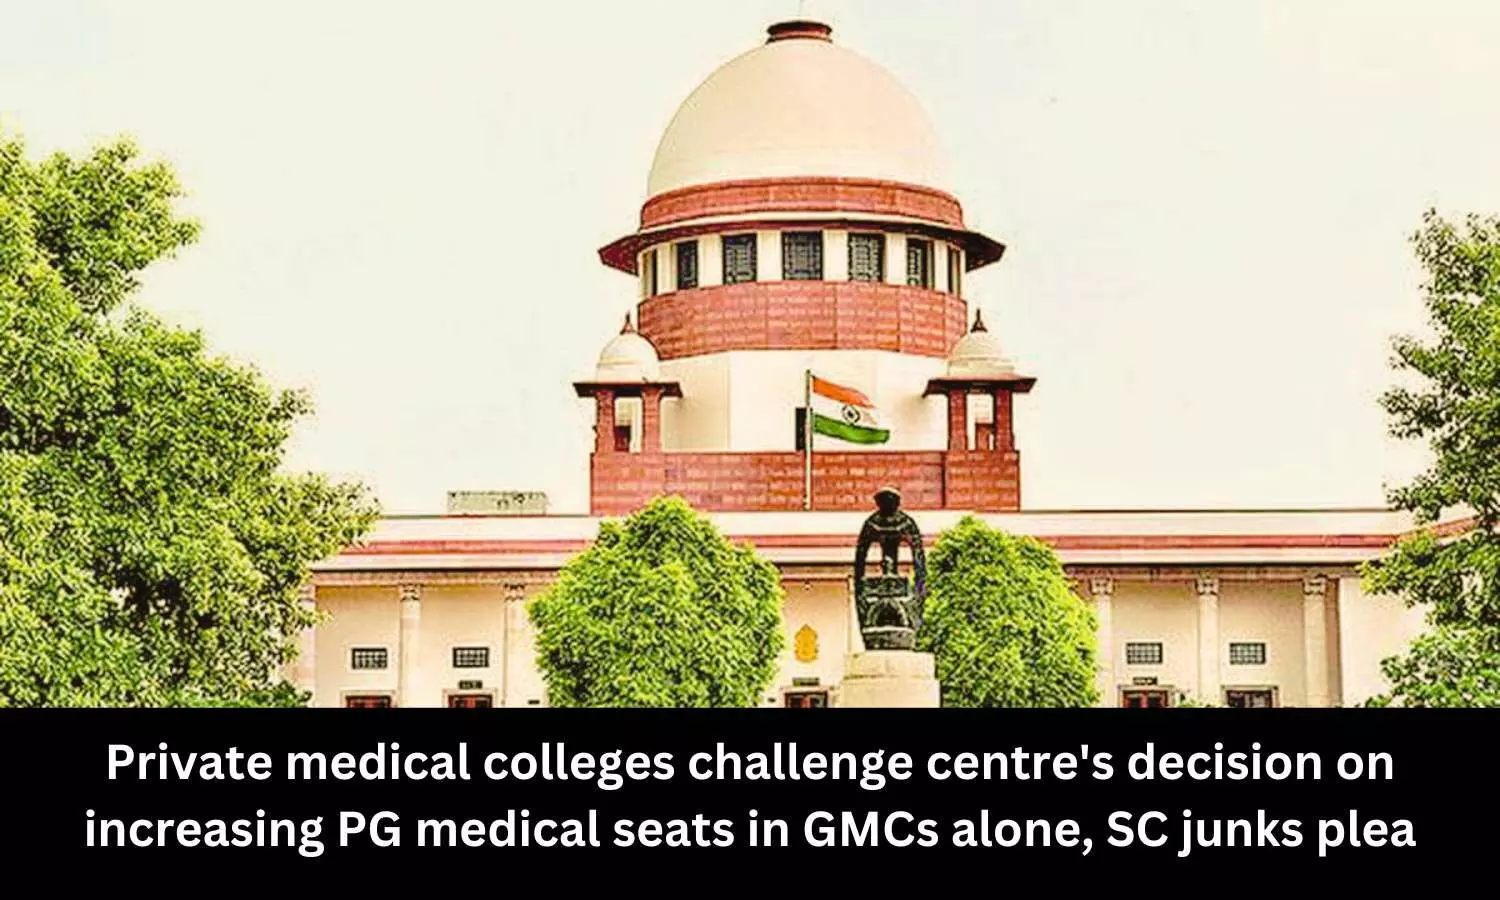 SC junks plea challenging Centre decision to increase PG medical seats in GMCs alone